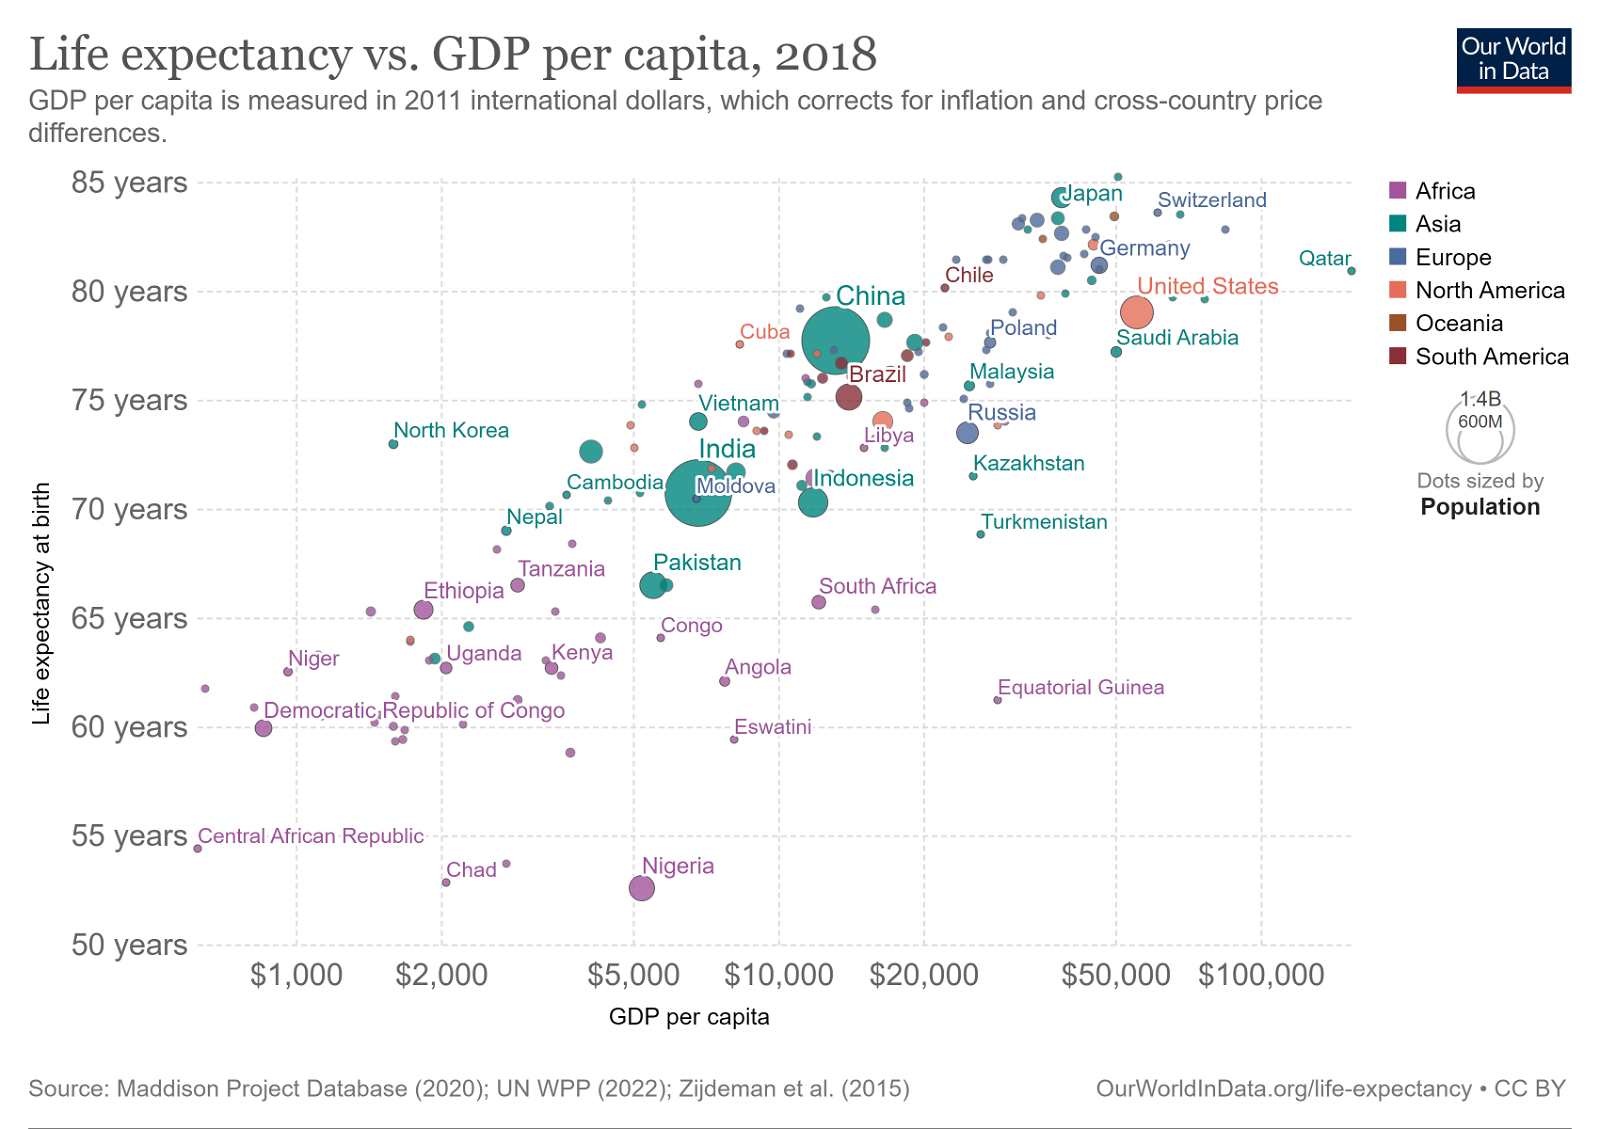 Life expectancy vs GDP growth